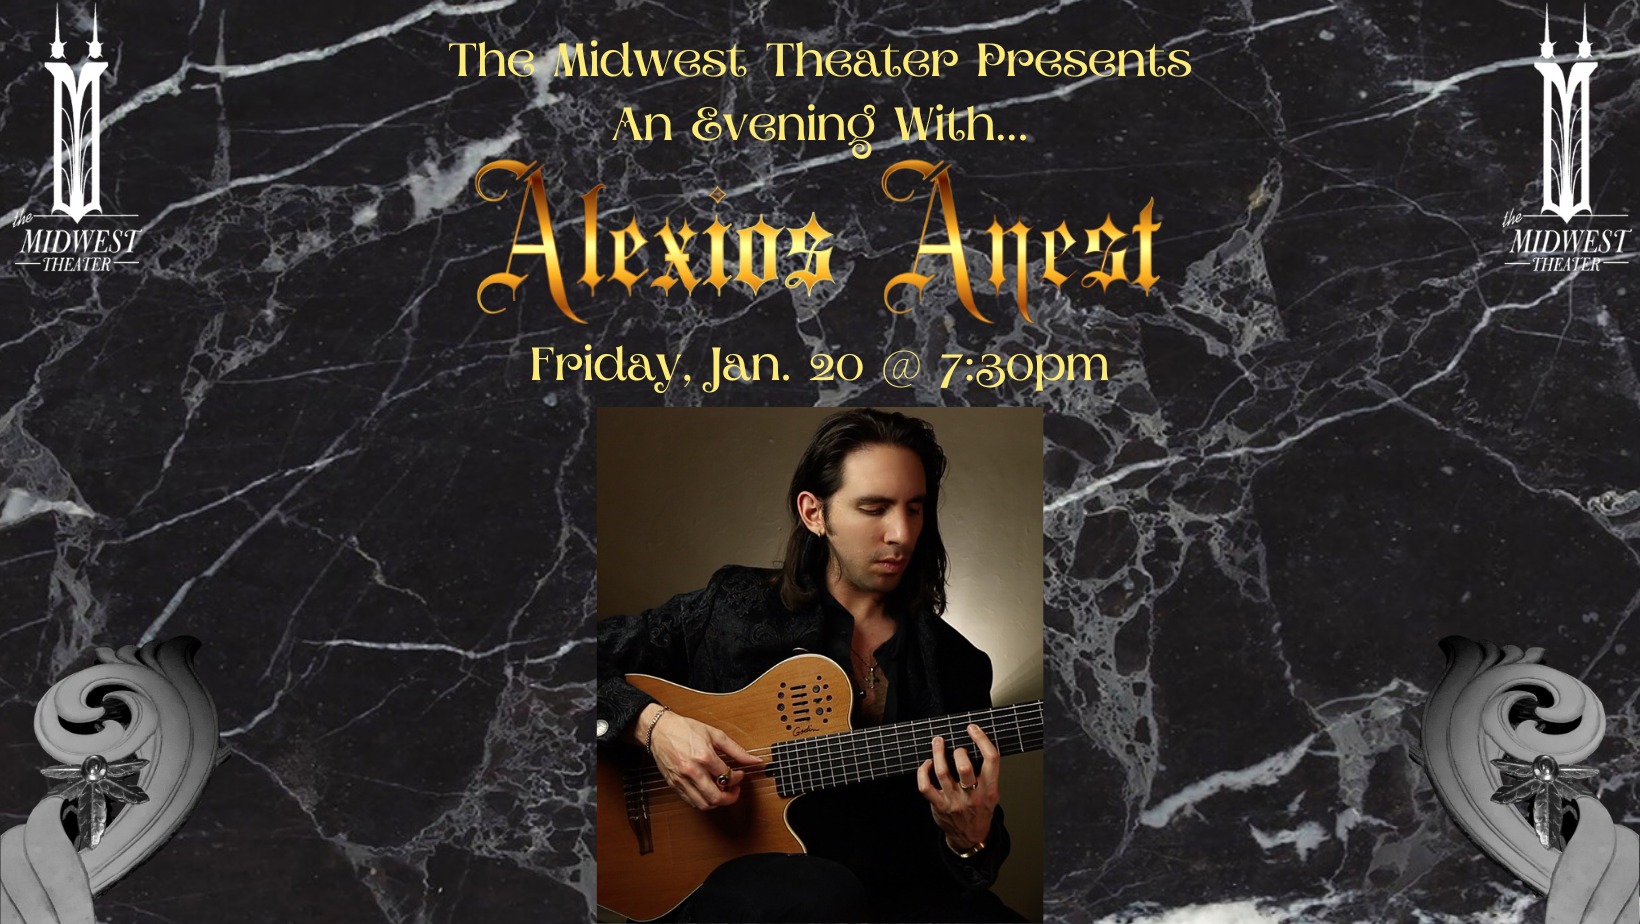 Event Promo Photo For An Evening with Alexios